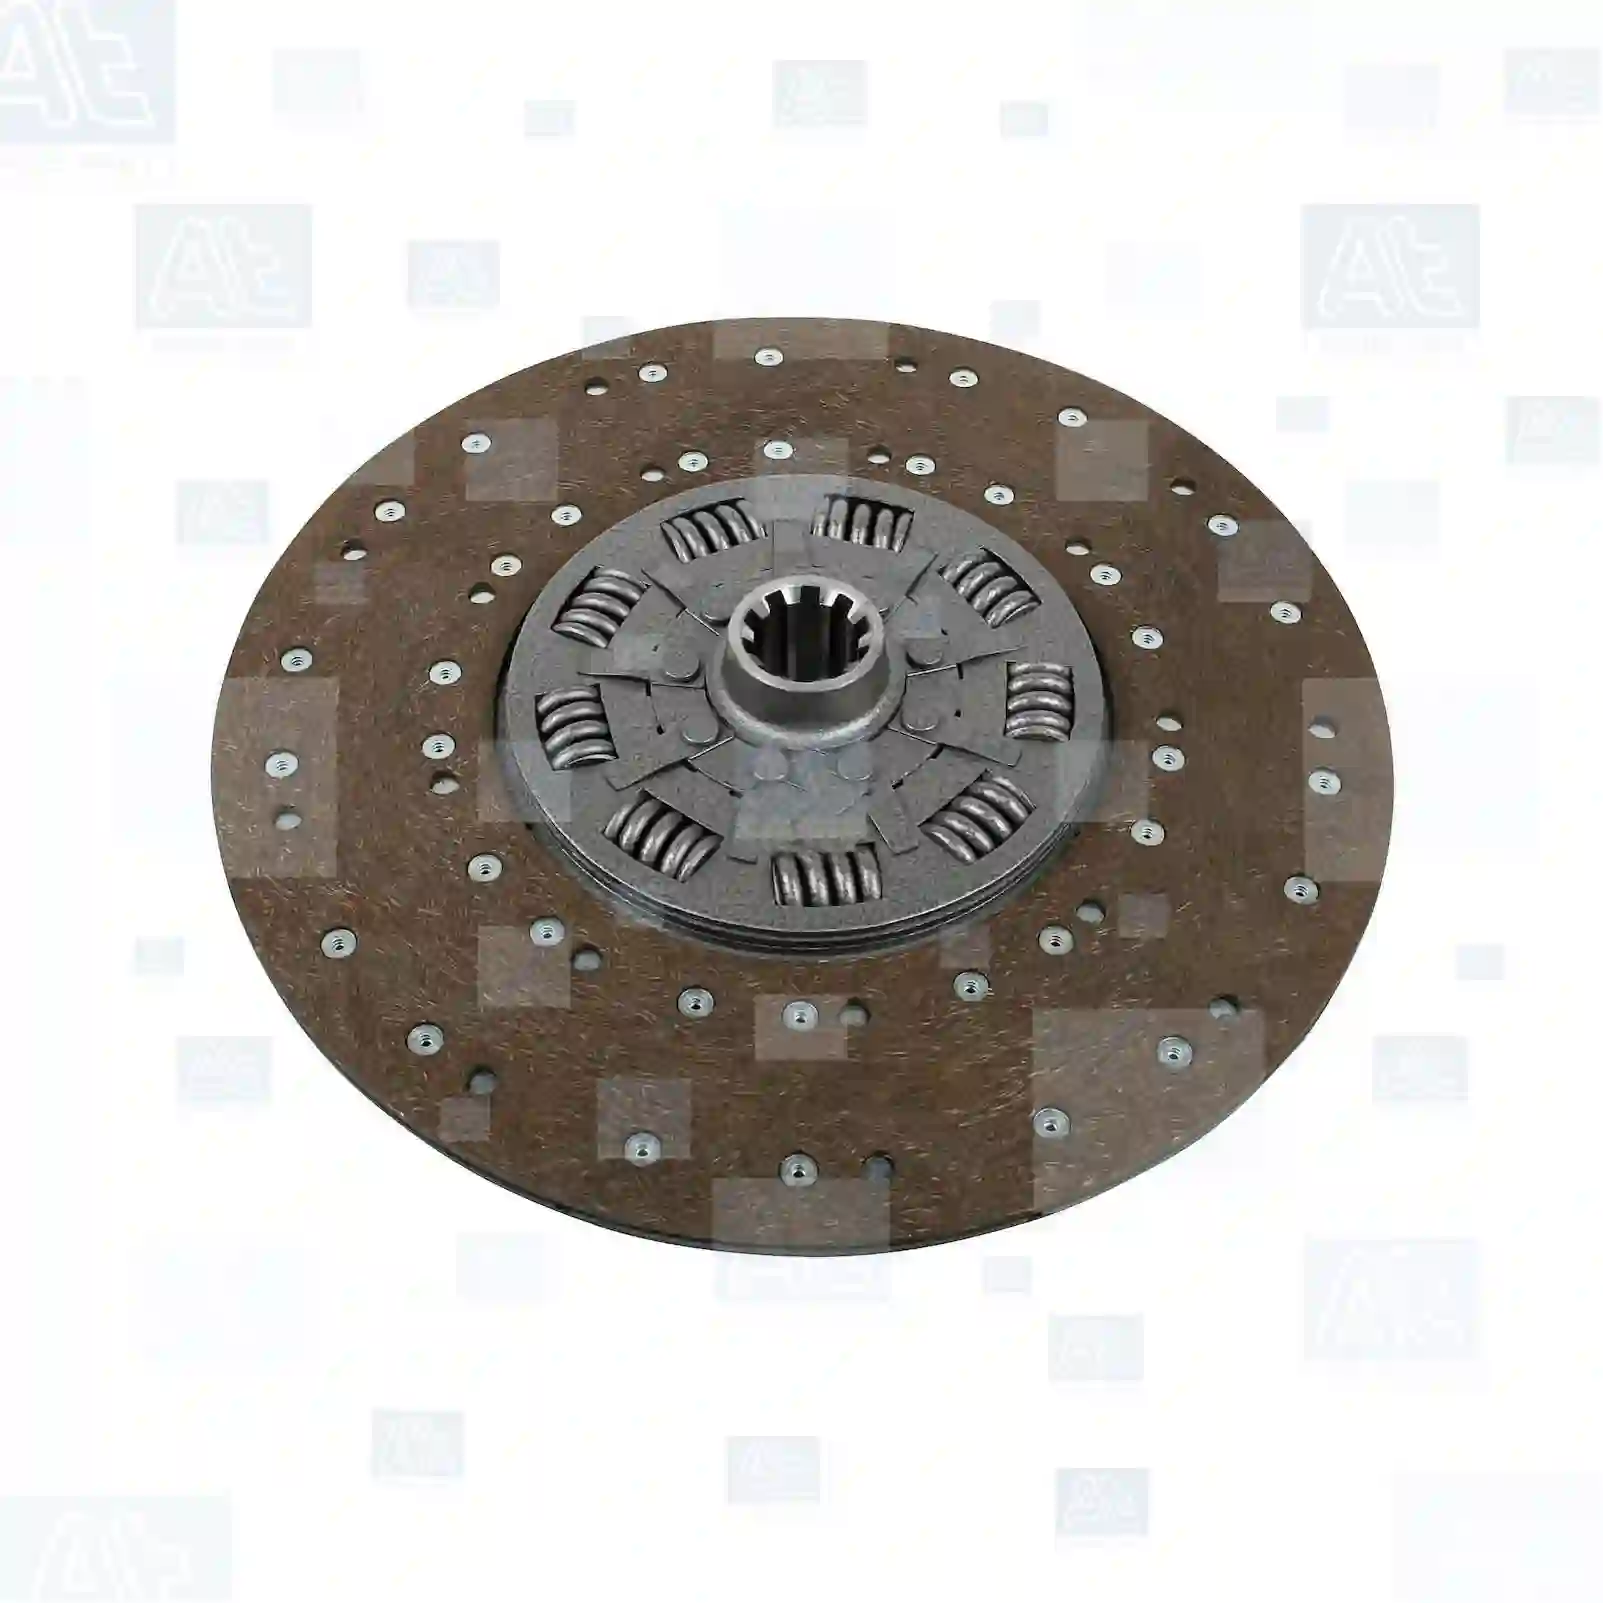 Clutch disc, 77722420, 00101647, 24432740, 01173188, 01173290, 42061547, 42102173, 00025020200000, 01903893, 01904702, 42061547, 42102173, 00151524, 81303010213, 81303010291, 81303010343, 81303019213, 81303019291, 81303019343, 0022500003, 0022509903, 0032500003, 0042509903, 0052500103, 0052500203, 0062509803, 0062509903, 0072500003, 0072504203, 0072504303, 0072506703, 0072506803, 007250680380, 0072506903, 00725043030080, 007250430380, 0082502703, 0082502803, 011009713, 011009718, 040110101, 040110110, 040110111, 040110121, 040110601, 81303010291, 81303010343, 5000587571, 5000589571, 5000822147, 9532628030, 81500160011, 81500160017, 99114160017, 99114160020, 99114160030, 99114160907, 632100250, 632101350, 632101360 ||  77722420 At Spare Part | Engine, Accelerator Pedal, Camshaft, Connecting Rod, Crankcase, Crankshaft, Cylinder Head, Engine Suspension Mountings, Exhaust Manifold, Exhaust Gas Recirculation, Filter Kits, Flywheel Housing, General Overhaul Kits, Engine, Intake Manifold, Oil Cleaner, Oil Cooler, Oil Filter, Oil Pump, Oil Sump, Piston & Liner, Sensor & Switch, Timing Case, Turbocharger, Cooling System, Belt Tensioner, Coolant Filter, Coolant Pipe, Corrosion Prevention Agent, Drive, Expansion Tank, Fan, Intercooler, Monitors & Gauges, Radiator, Thermostat, V-Belt / Timing belt, Water Pump, Fuel System, Electronical Injector Unit, Feed Pump, Fuel Filter, cpl., Fuel Gauge Sender,  Fuel Line, Fuel Pump, Fuel Tank, Injection Line Kit, Injection Pump, Exhaust System, Clutch & Pedal, Gearbox, Propeller Shaft, Axles, Brake System, Hubs & Wheels, Suspension, Leaf Spring, Universal Parts / Accessories, Steering, Electrical System, Cabin Clutch disc, 77722420, 00101647, 24432740, 01173188, 01173290, 42061547, 42102173, 00025020200000, 01903893, 01904702, 42061547, 42102173, 00151524, 81303010213, 81303010291, 81303010343, 81303019213, 81303019291, 81303019343, 0022500003, 0022509903, 0032500003, 0042509903, 0052500103, 0052500203, 0062509803, 0062509903, 0072500003, 0072504203, 0072504303, 0072506703, 0072506803, 007250680380, 0072506903, 00725043030080, 007250430380, 0082502703, 0082502803, 011009713, 011009718, 040110101, 040110110, 040110111, 040110121, 040110601, 81303010291, 81303010343, 5000587571, 5000589571, 5000822147, 9532628030, 81500160011, 81500160017, 99114160017, 99114160020, 99114160030, 99114160907, 632100250, 632101350, 632101360 ||  77722420 At Spare Part | Engine, Accelerator Pedal, Camshaft, Connecting Rod, Crankcase, Crankshaft, Cylinder Head, Engine Suspension Mountings, Exhaust Manifold, Exhaust Gas Recirculation, Filter Kits, Flywheel Housing, General Overhaul Kits, Engine, Intake Manifold, Oil Cleaner, Oil Cooler, Oil Filter, Oil Pump, Oil Sump, Piston & Liner, Sensor & Switch, Timing Case, Turbocharger, Cooling System, Belt Tensioner, Coolant Filter, Coolant Pipe, Corrosion Prevention Agent, Drive, Expansion Tank, Fan, Intercooler, Monitors & Gauges, Radiator, Thermostat, V-Belt / Timing belt, Water Pump, Fuel System, Electronical Injector Unit, Feed Pump, Fuel Filter, cpl., Fuel Gauge Sender,  Fuel Line, Fuel Pump, Fuel Tank, Injection Line Kit, Injection Pump, Exhaust System, Clutch & Pedal, Gearbox, Propeller Shaft, Axles, Brake System, Hubs & Wheels, Suspension, Leaf Spring, Universal Parts / Accessories, Steering, Electrical System, Cabin